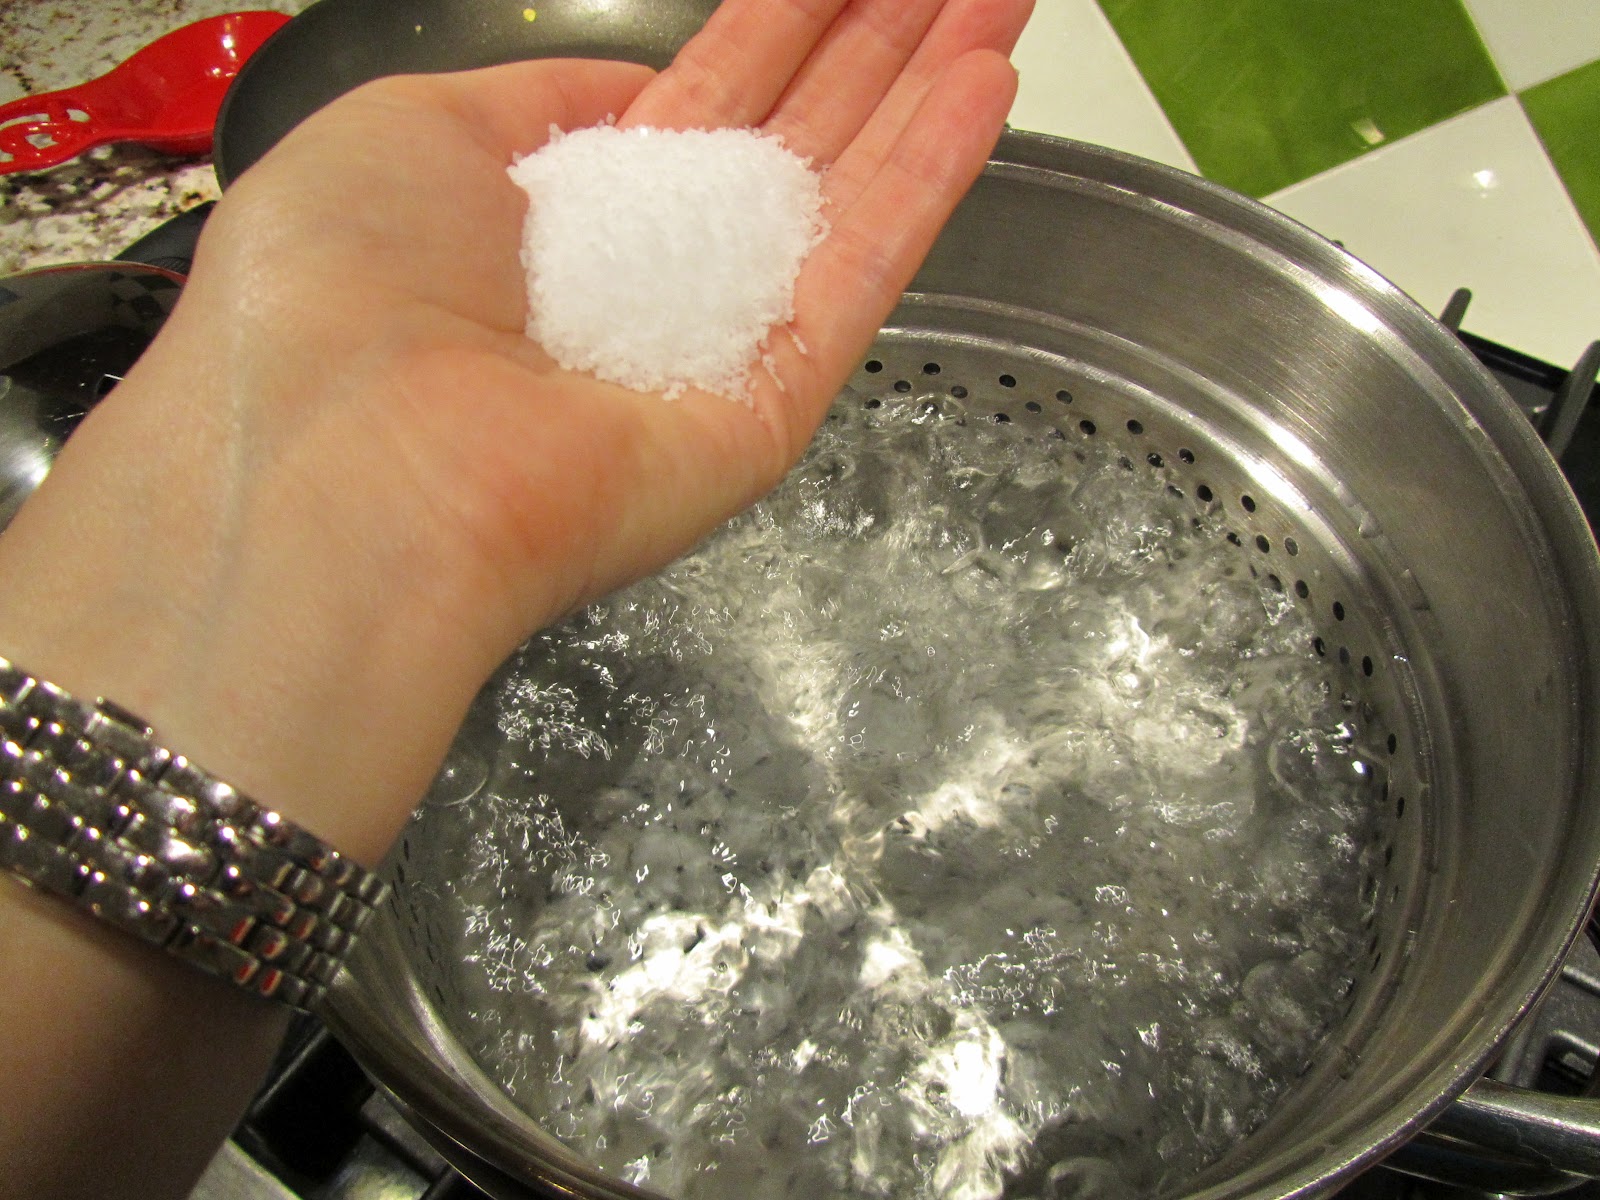 Adding salt to boiling water